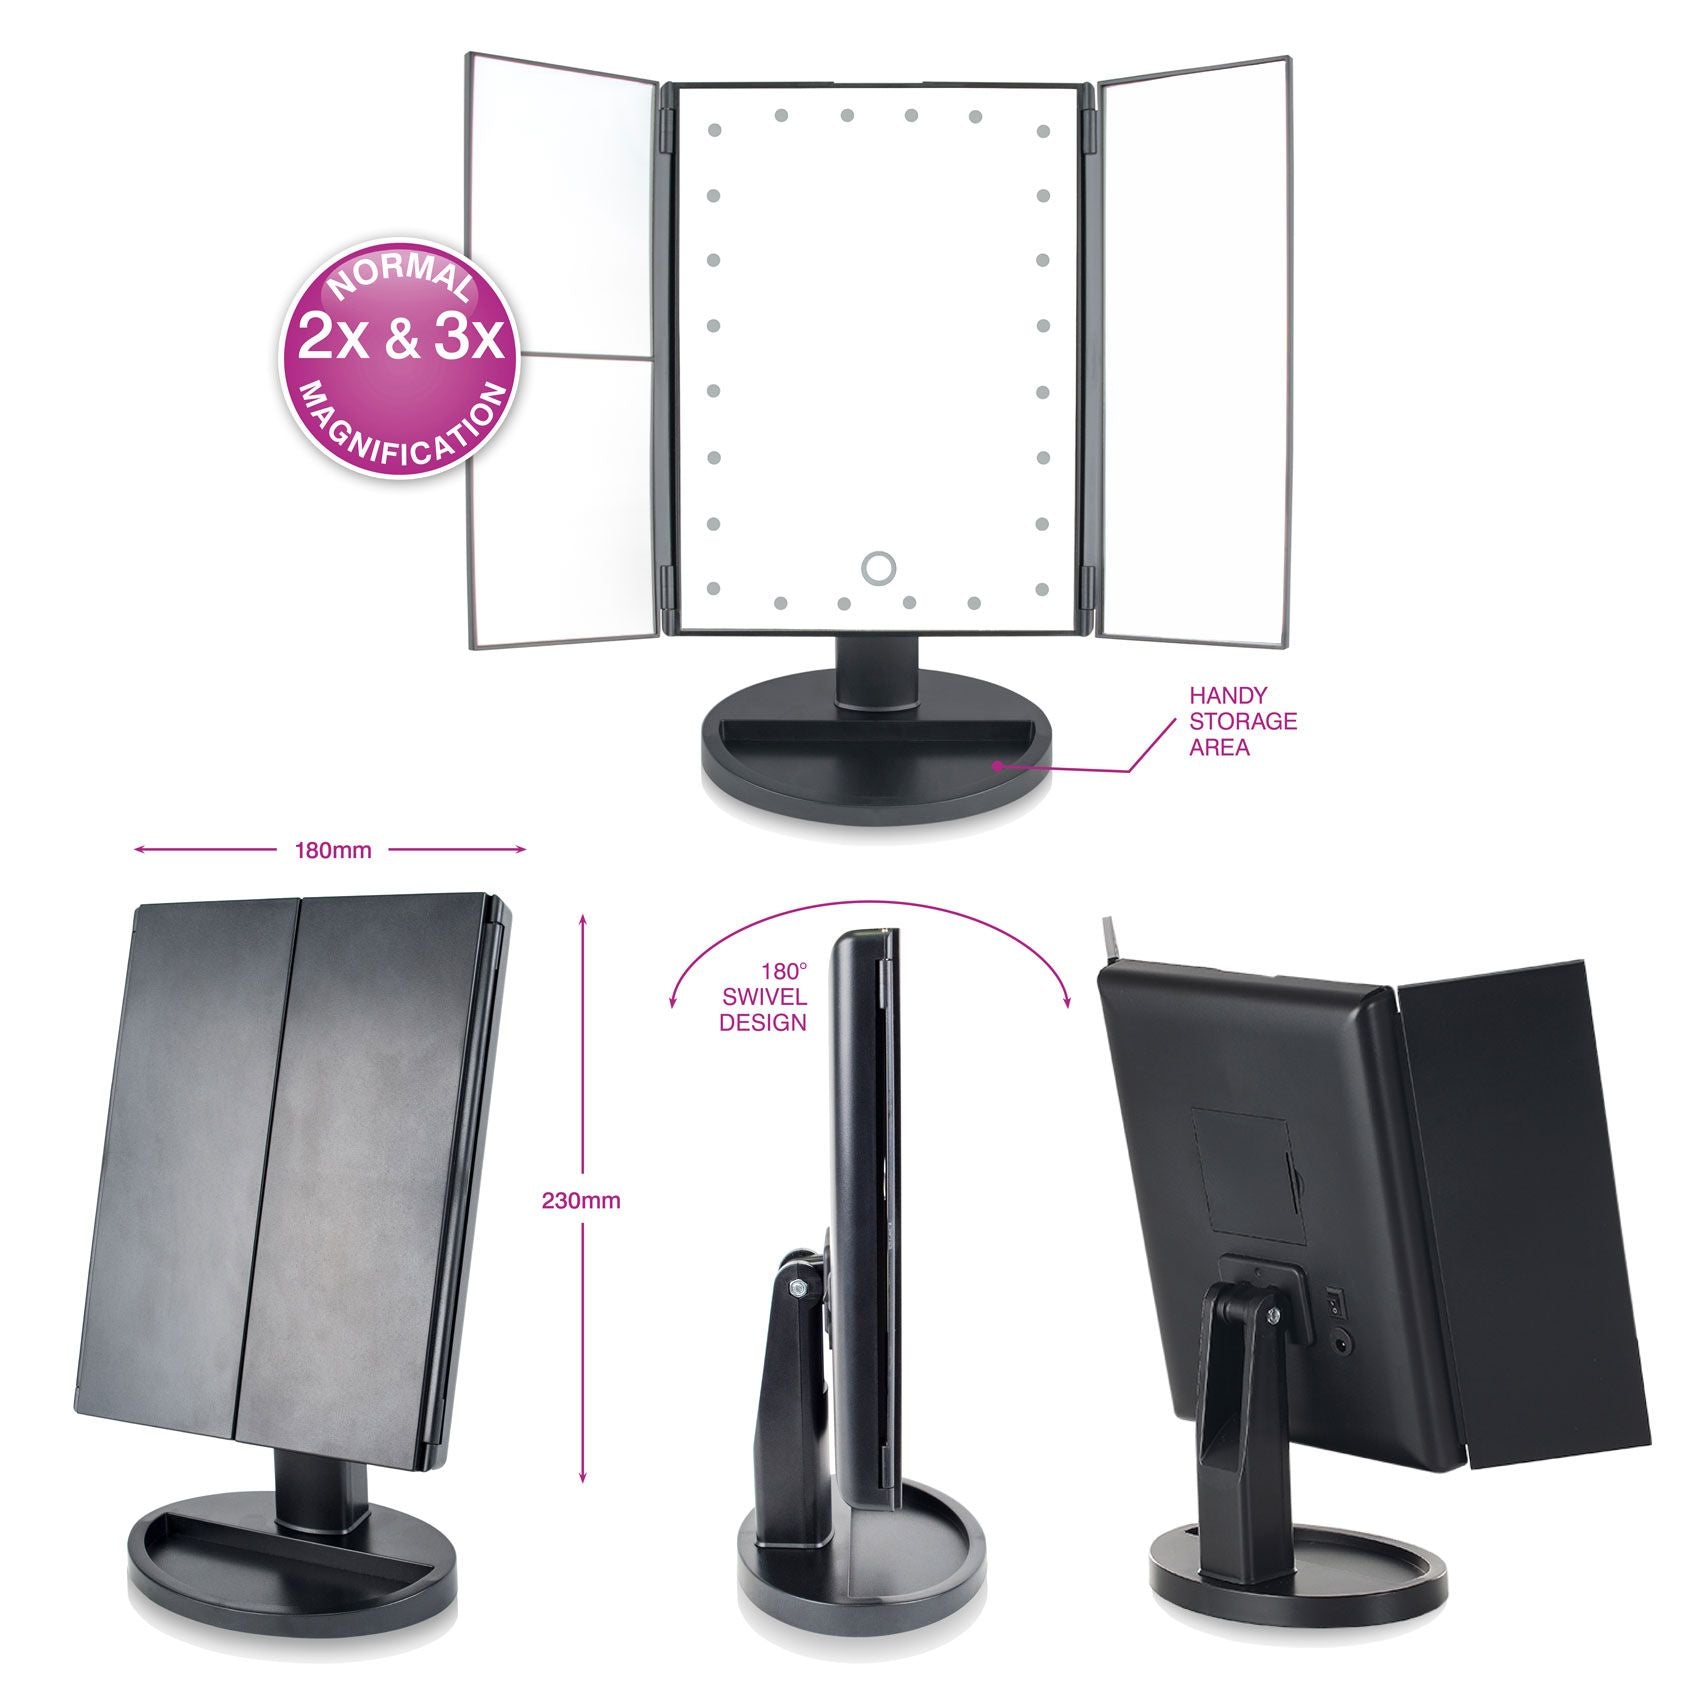 24 LED touch dimmable 3 way make up mirror with various inset images showing dimensions of closed mirror 180 degree swivel design and handy storage area